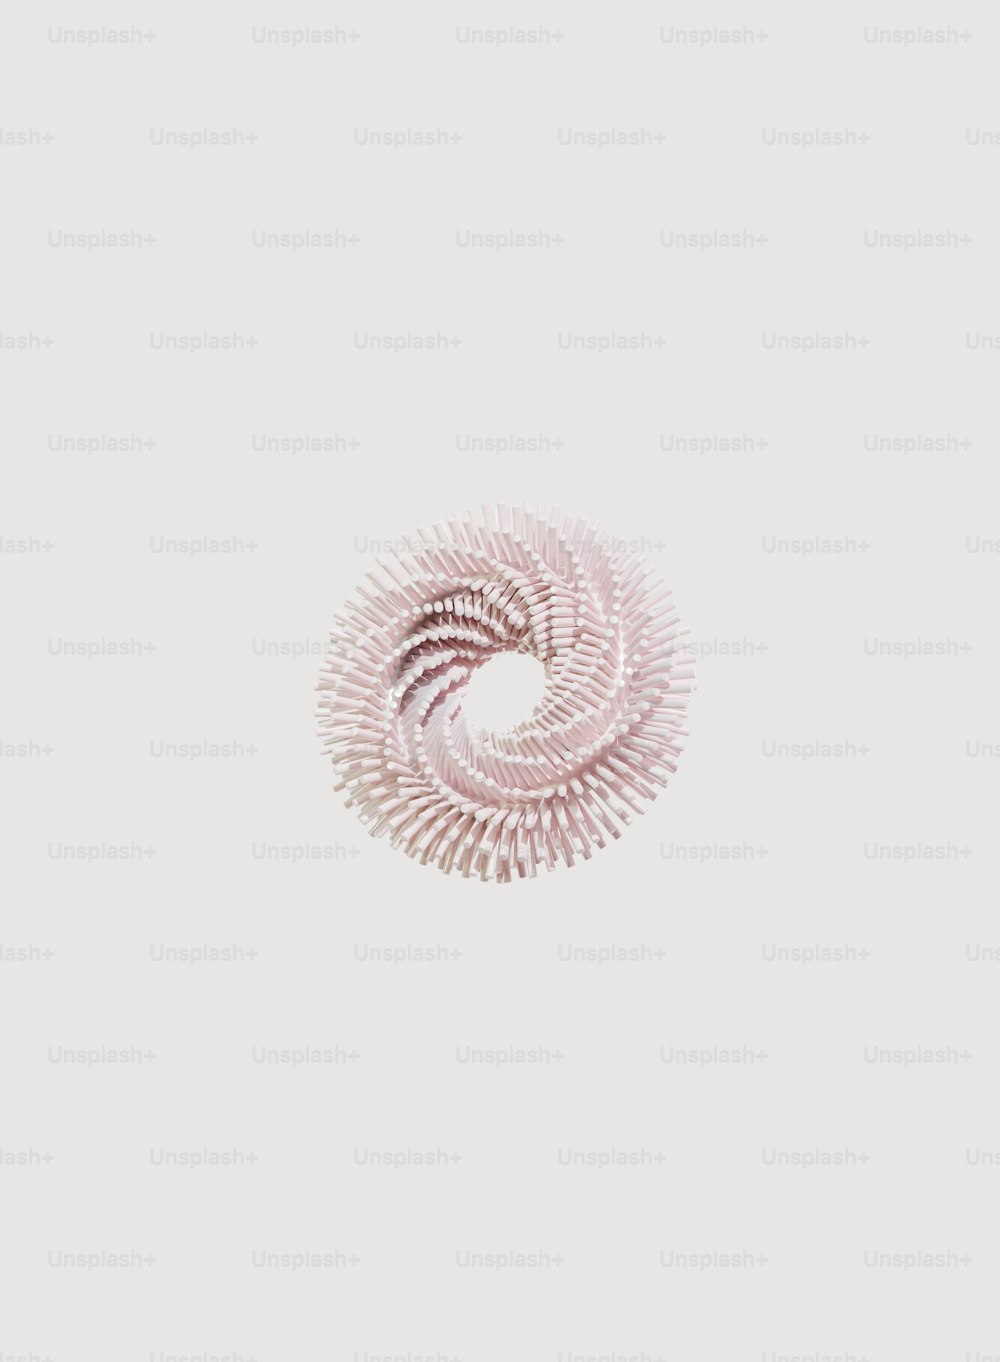 a spiral object is shown against a white background